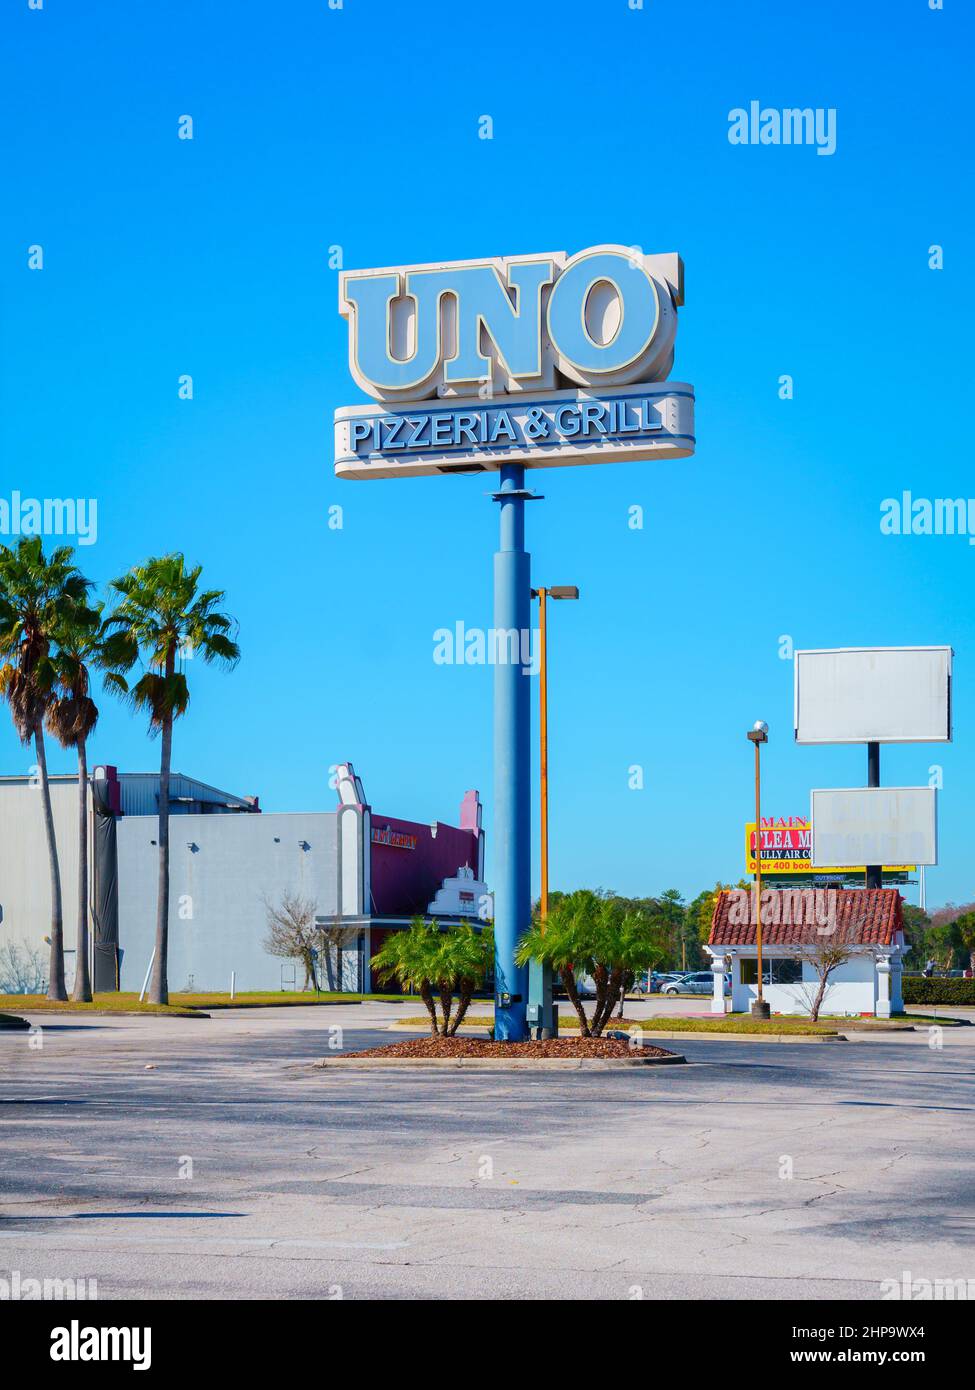 Kissimmee, Florida - February 9, 2022: Vertical Wide View of Uno Pizzeria and Grill Restaurant Sign on a Tall Street Post. Stock Photo